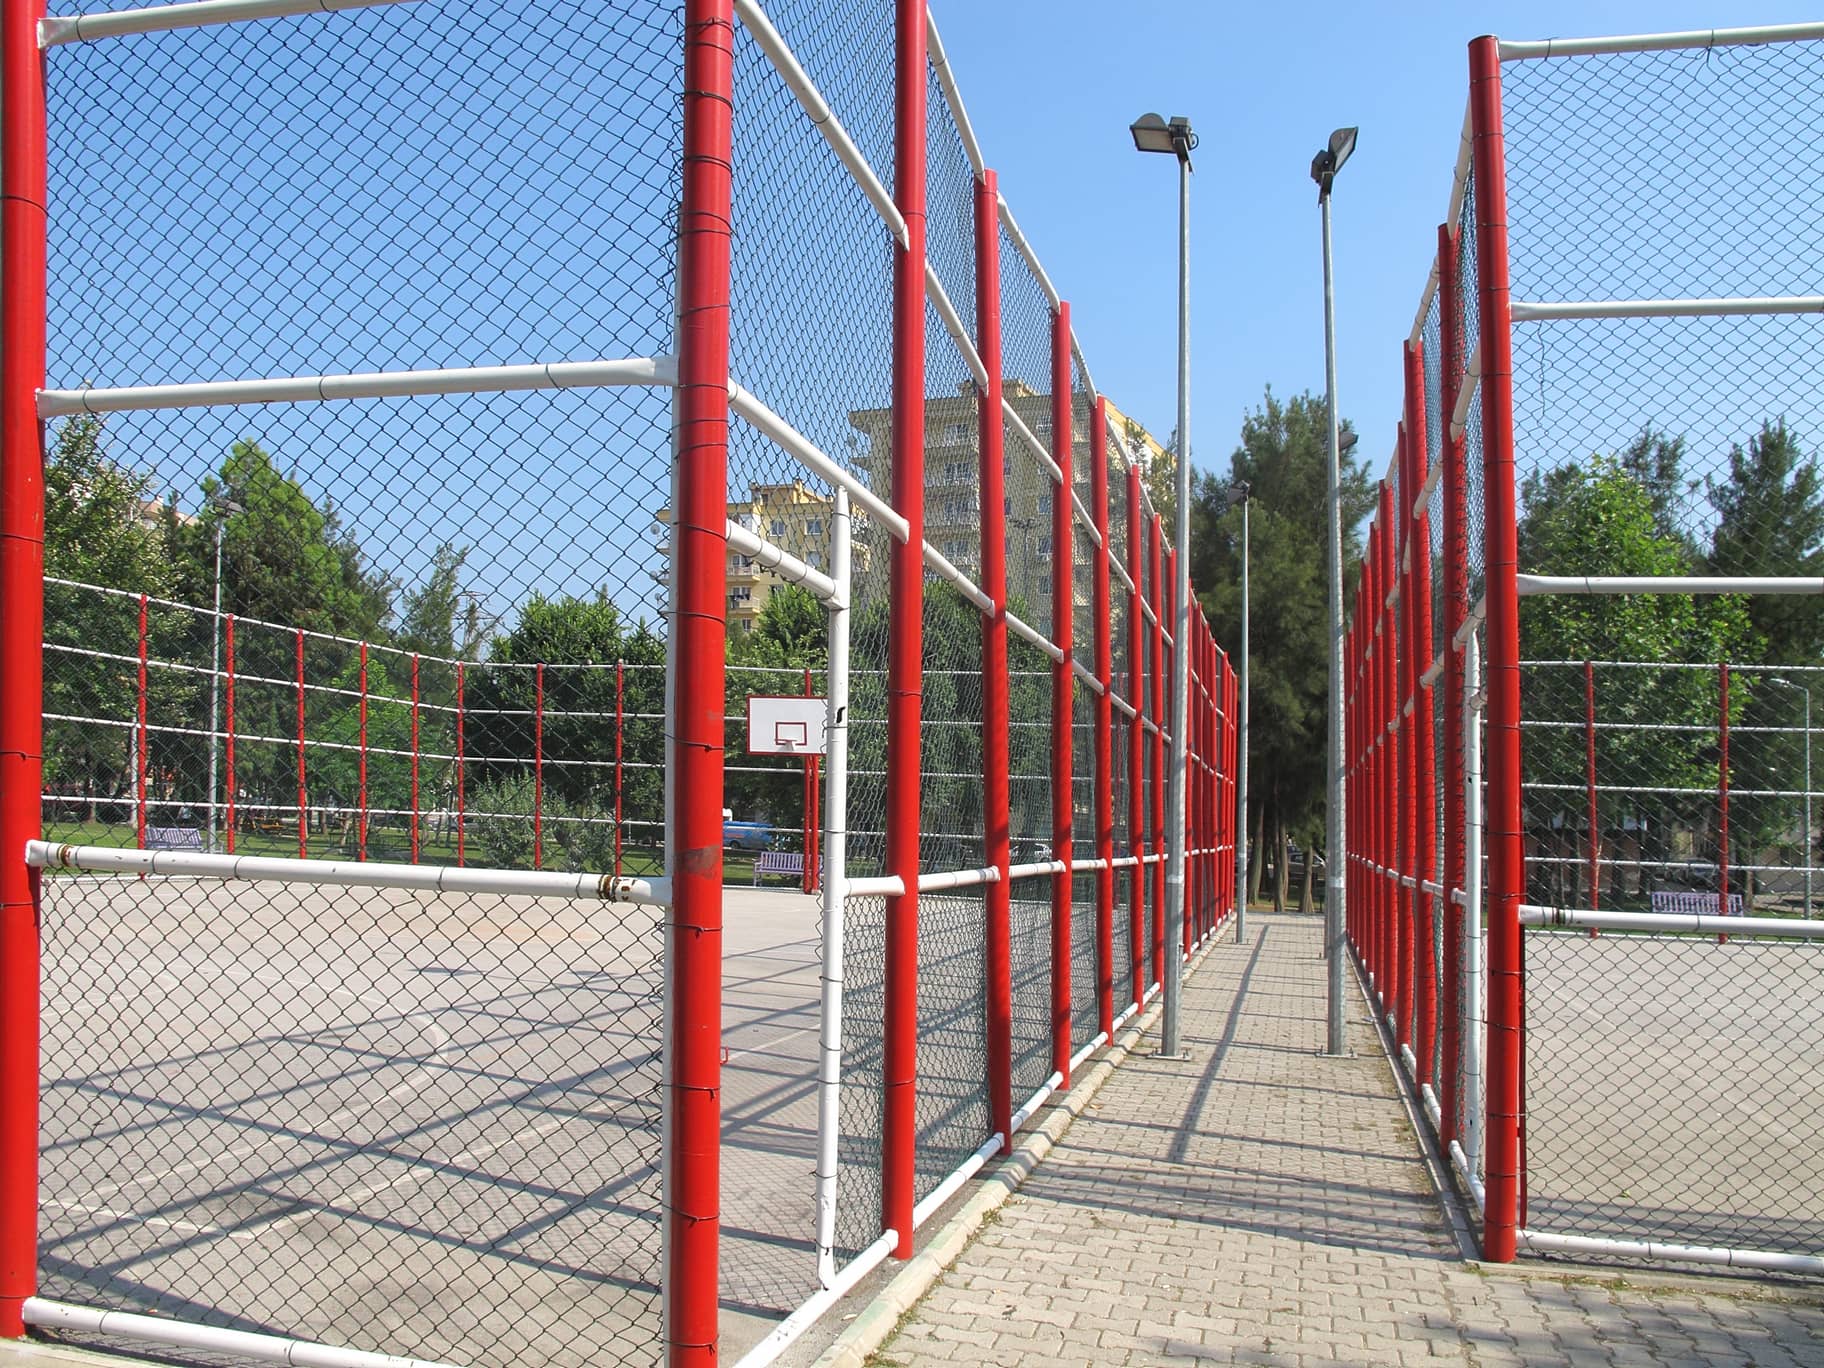 An image of metal fencing surrounding a basket ball court.